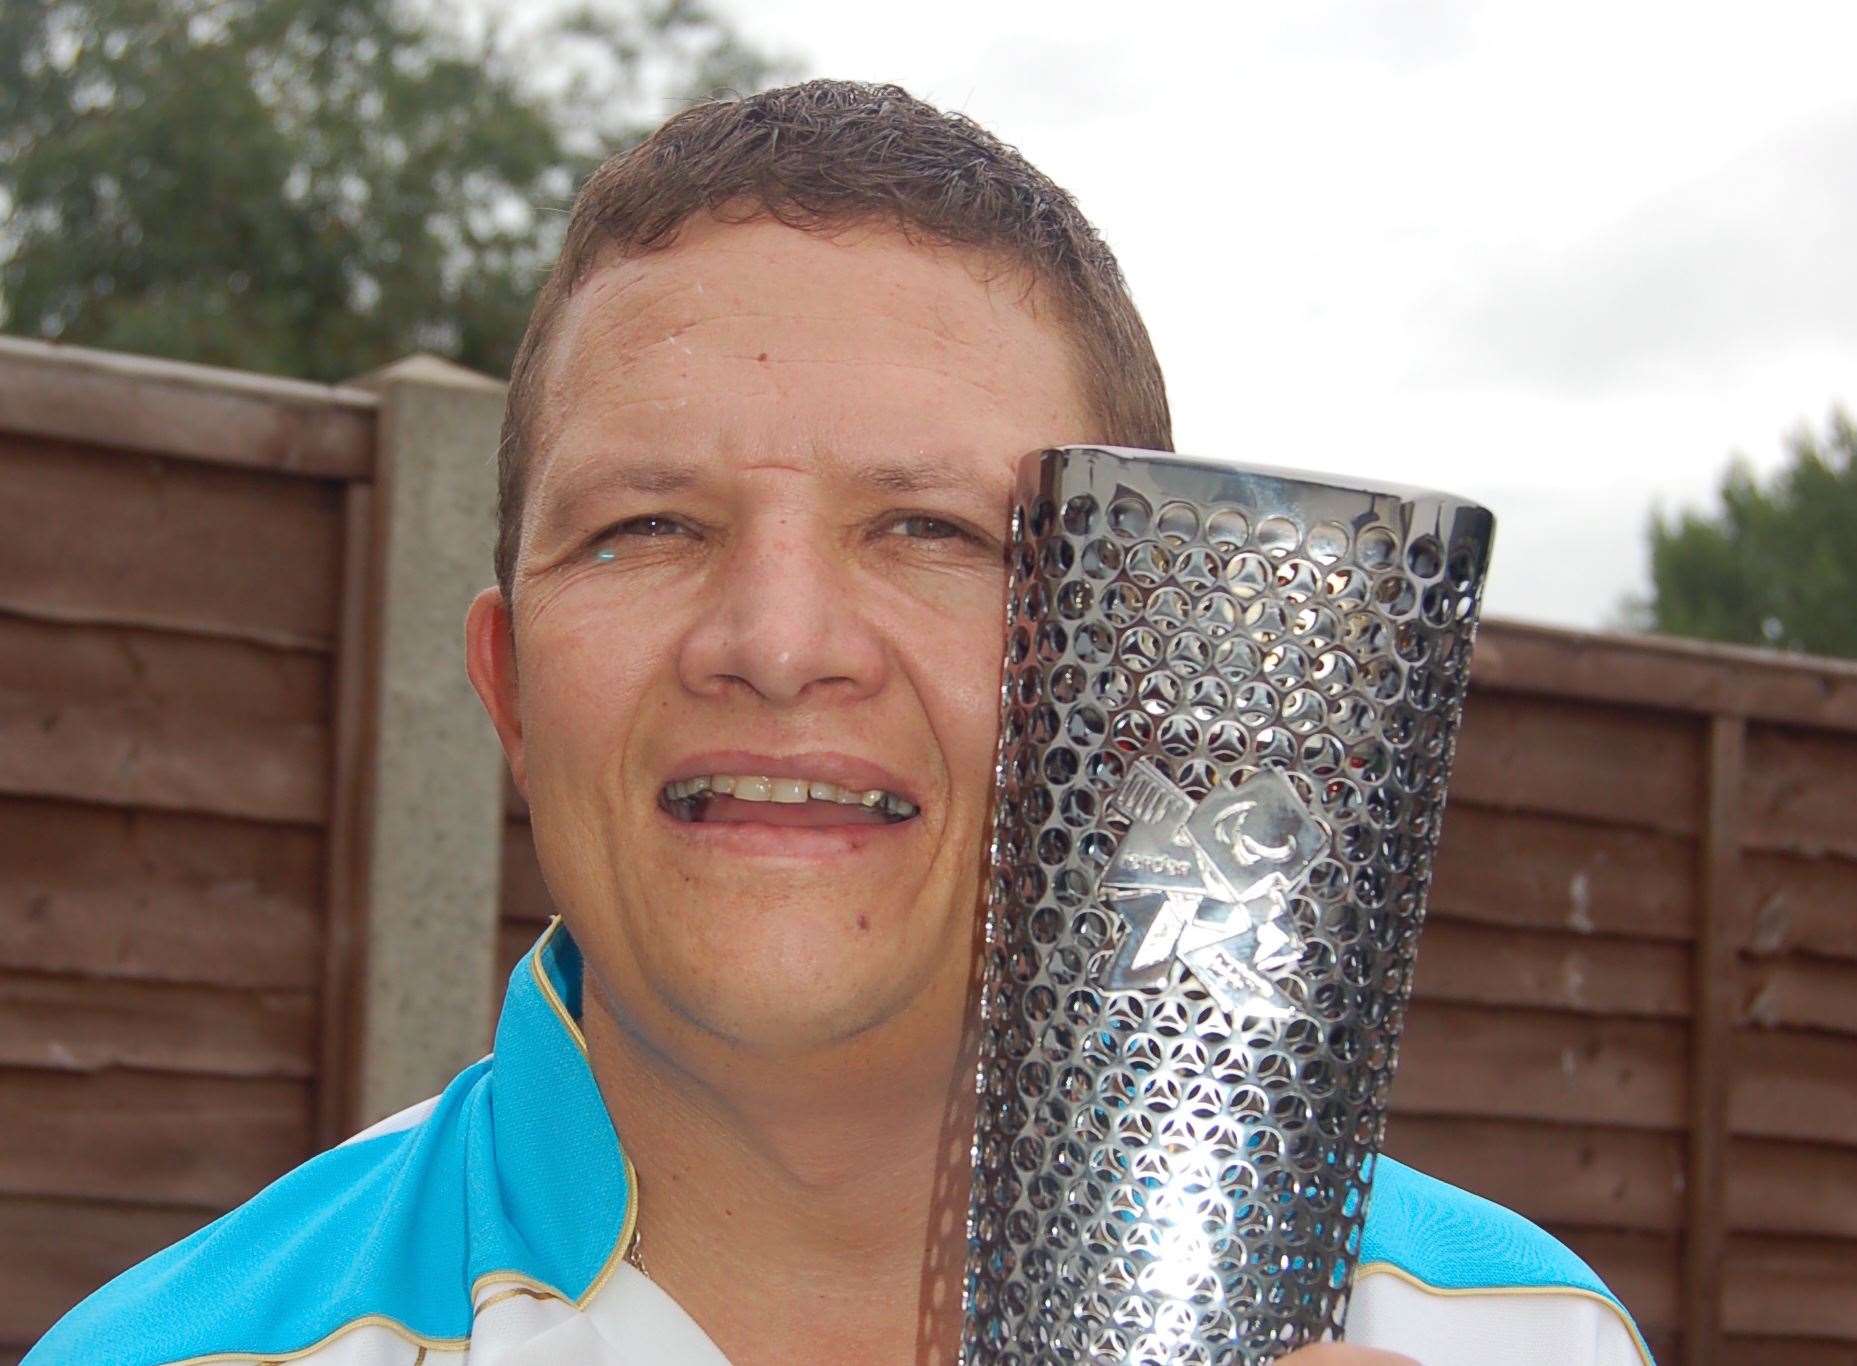 Paul Hardisty, who carried the Paralympic torch in 2012, was killed in a crash on the A252 in 2017